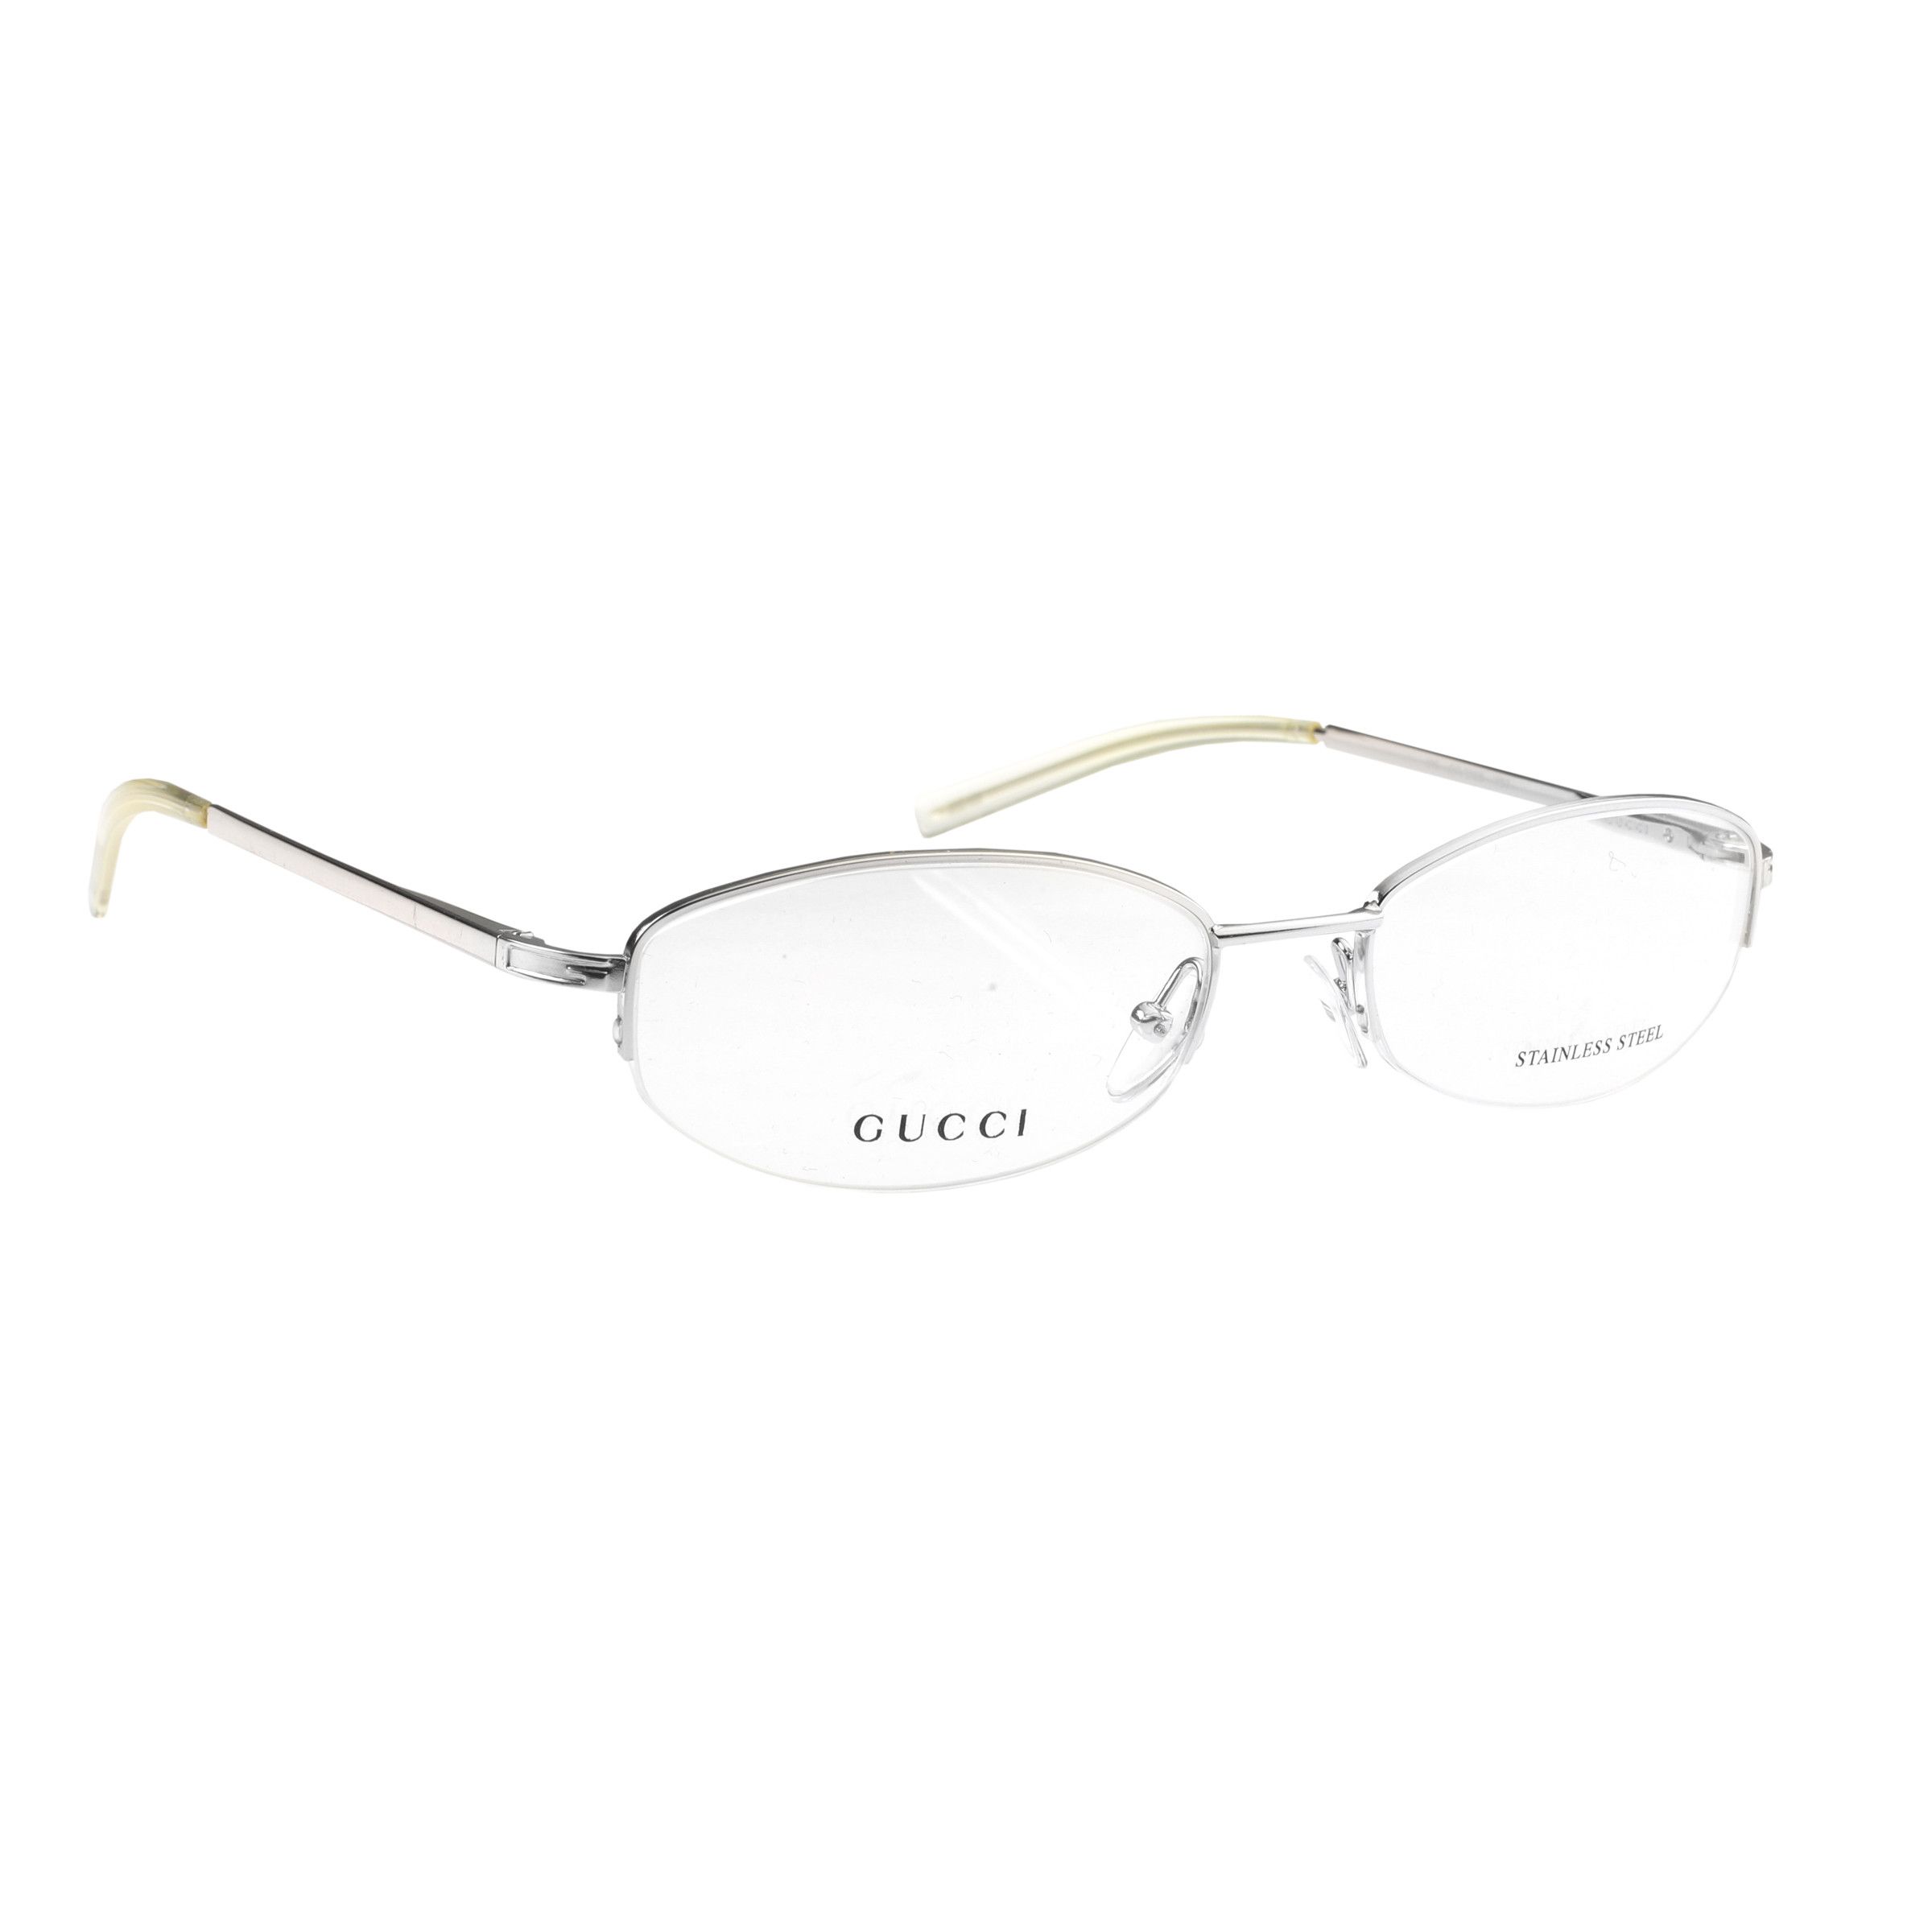 Pre-owned Archival Clothing X Gucci '90s Half Rim Silver Frame Glasses